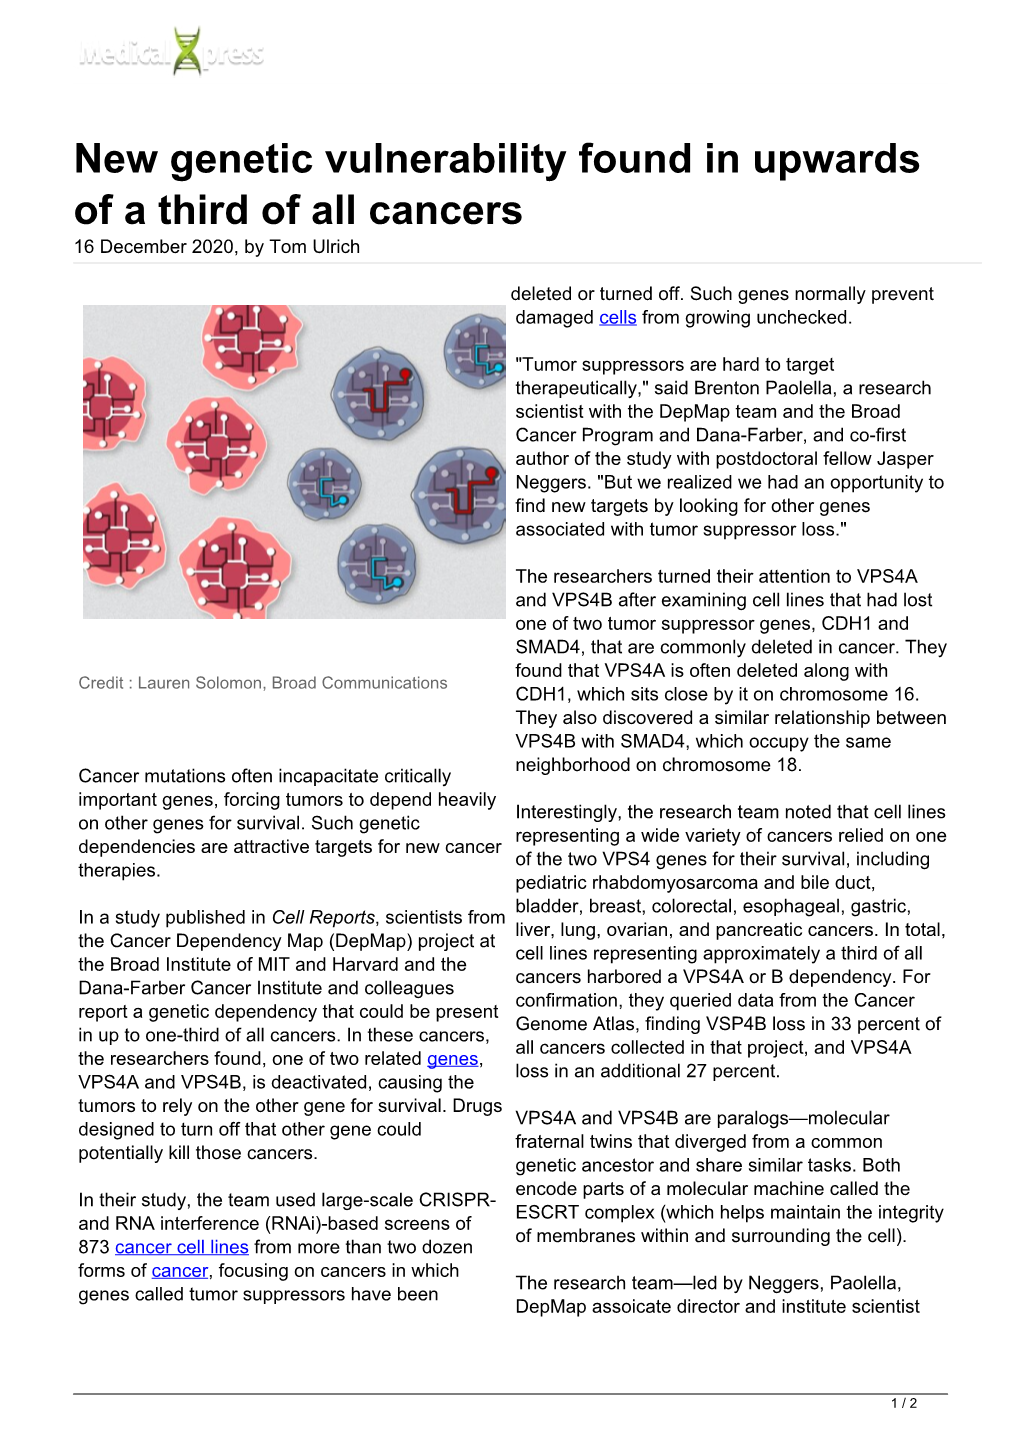 New Genetic Vulnerability Found in Upwards of a Third of All Cancers 16 December 2020, by Tom Ulrich